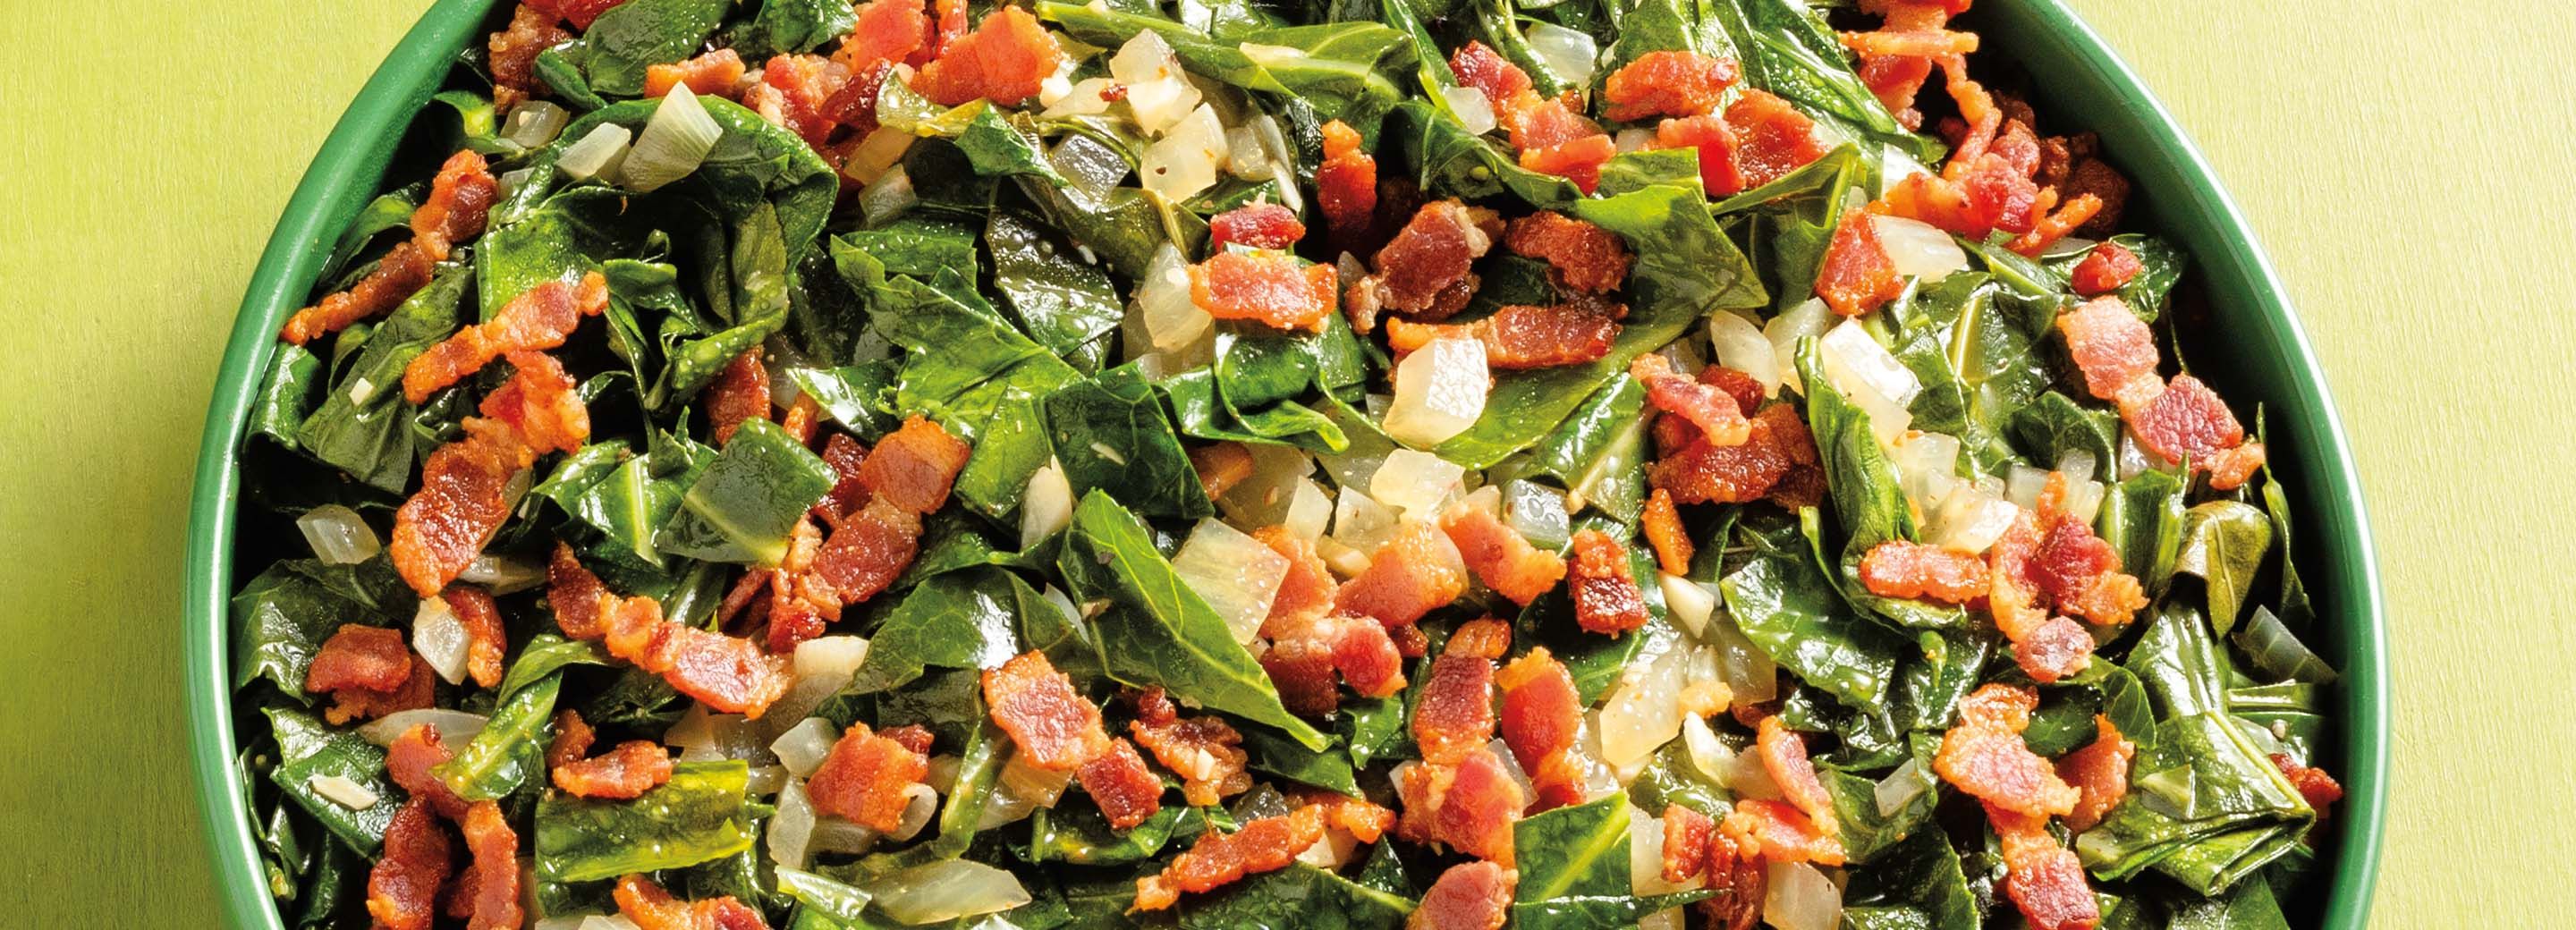 Quick Collard Greens and Bacon